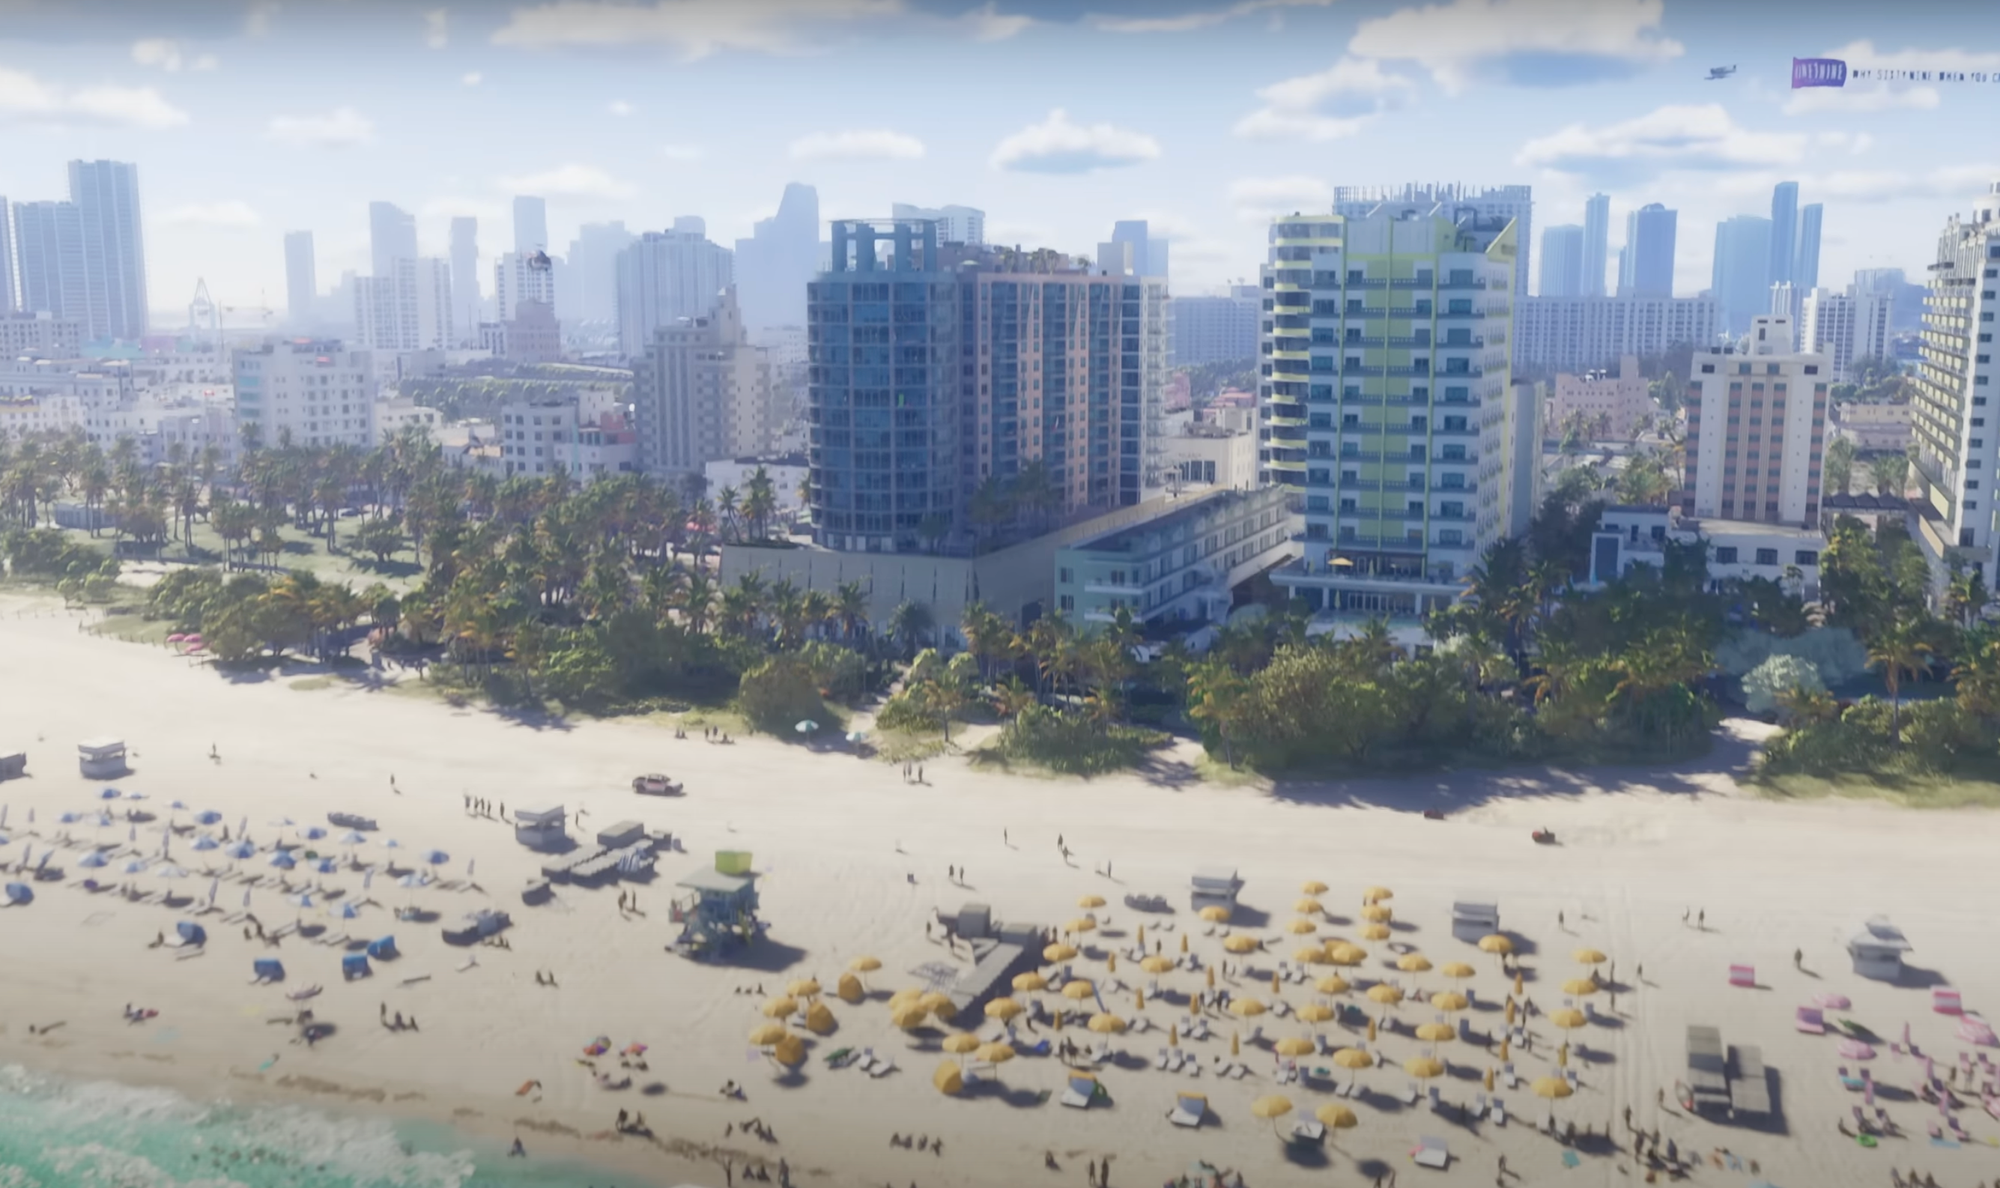 A screenshot from the trailer for GTA VI, showing a city skyline towering over a busy beach.